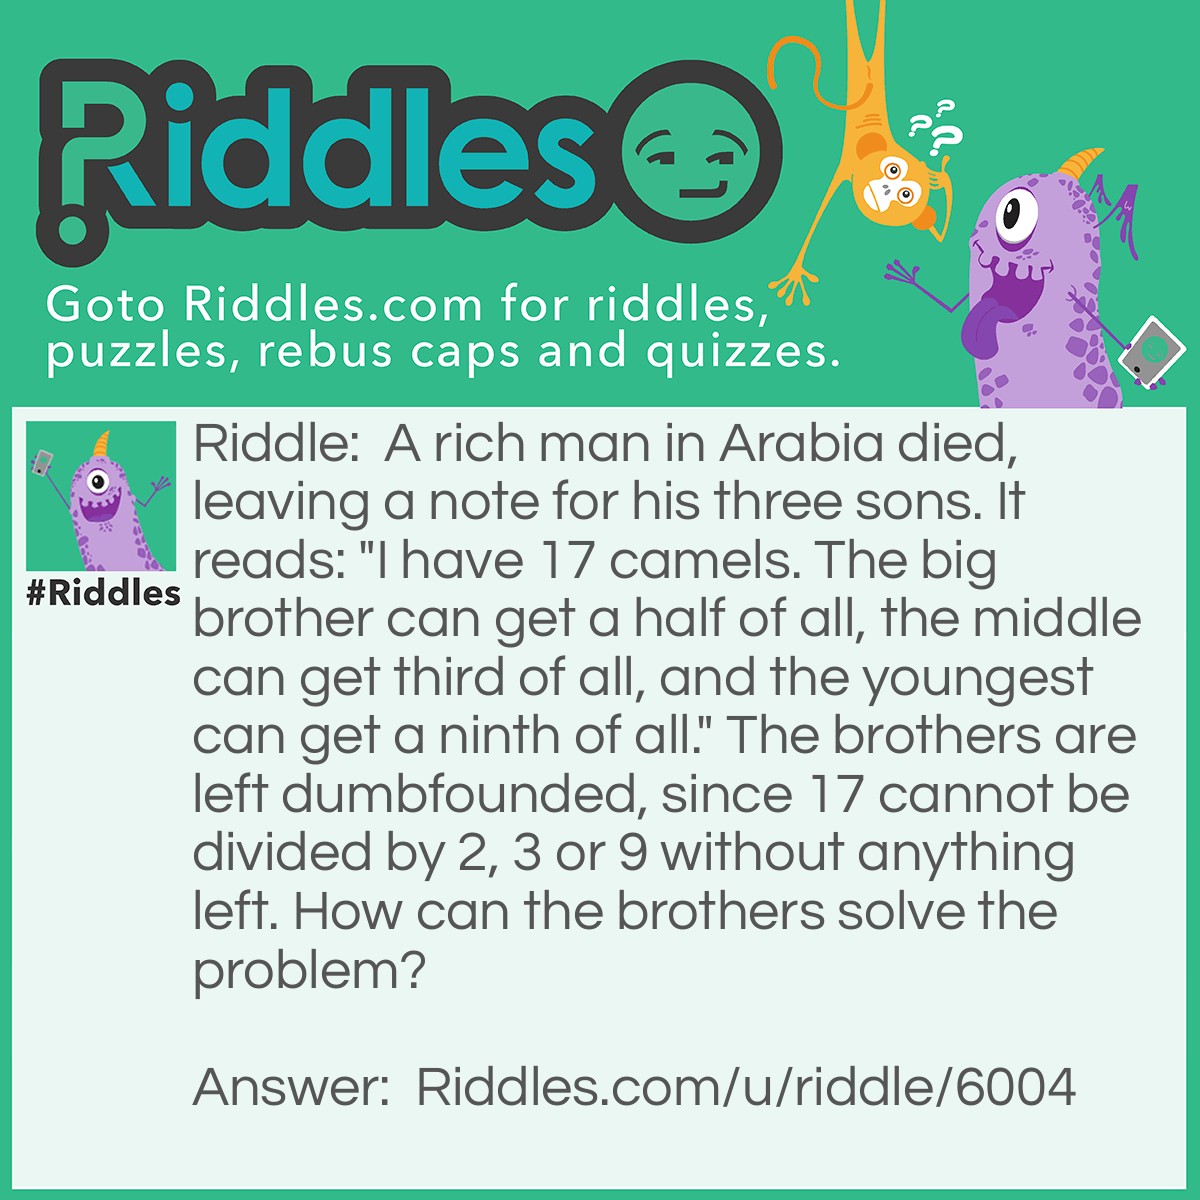 Riddle: A rich man in Arabia died, leaving a note for his three sons. It reads: "I have 17 camels. The big brother can get a half of all, the middle can get third of all, and the youngest can get a ninth of all." The brothers are left dumbfounded, since 17 cannot be divided by 2, 3 or 9 without anything left. How can the brothers solve the problem? Answer: 1. Borrow a camel from their neighbour to make 18 camels. 2. The big brother takes a half of it, so he takes 9. 3. The second brother takes a third of it, so he takes 6. 4. The youngest brother takes a ninth of it, so he takes 2. 5. All the camels that the brothers took add up to 17, leaving the camel they borrowed!